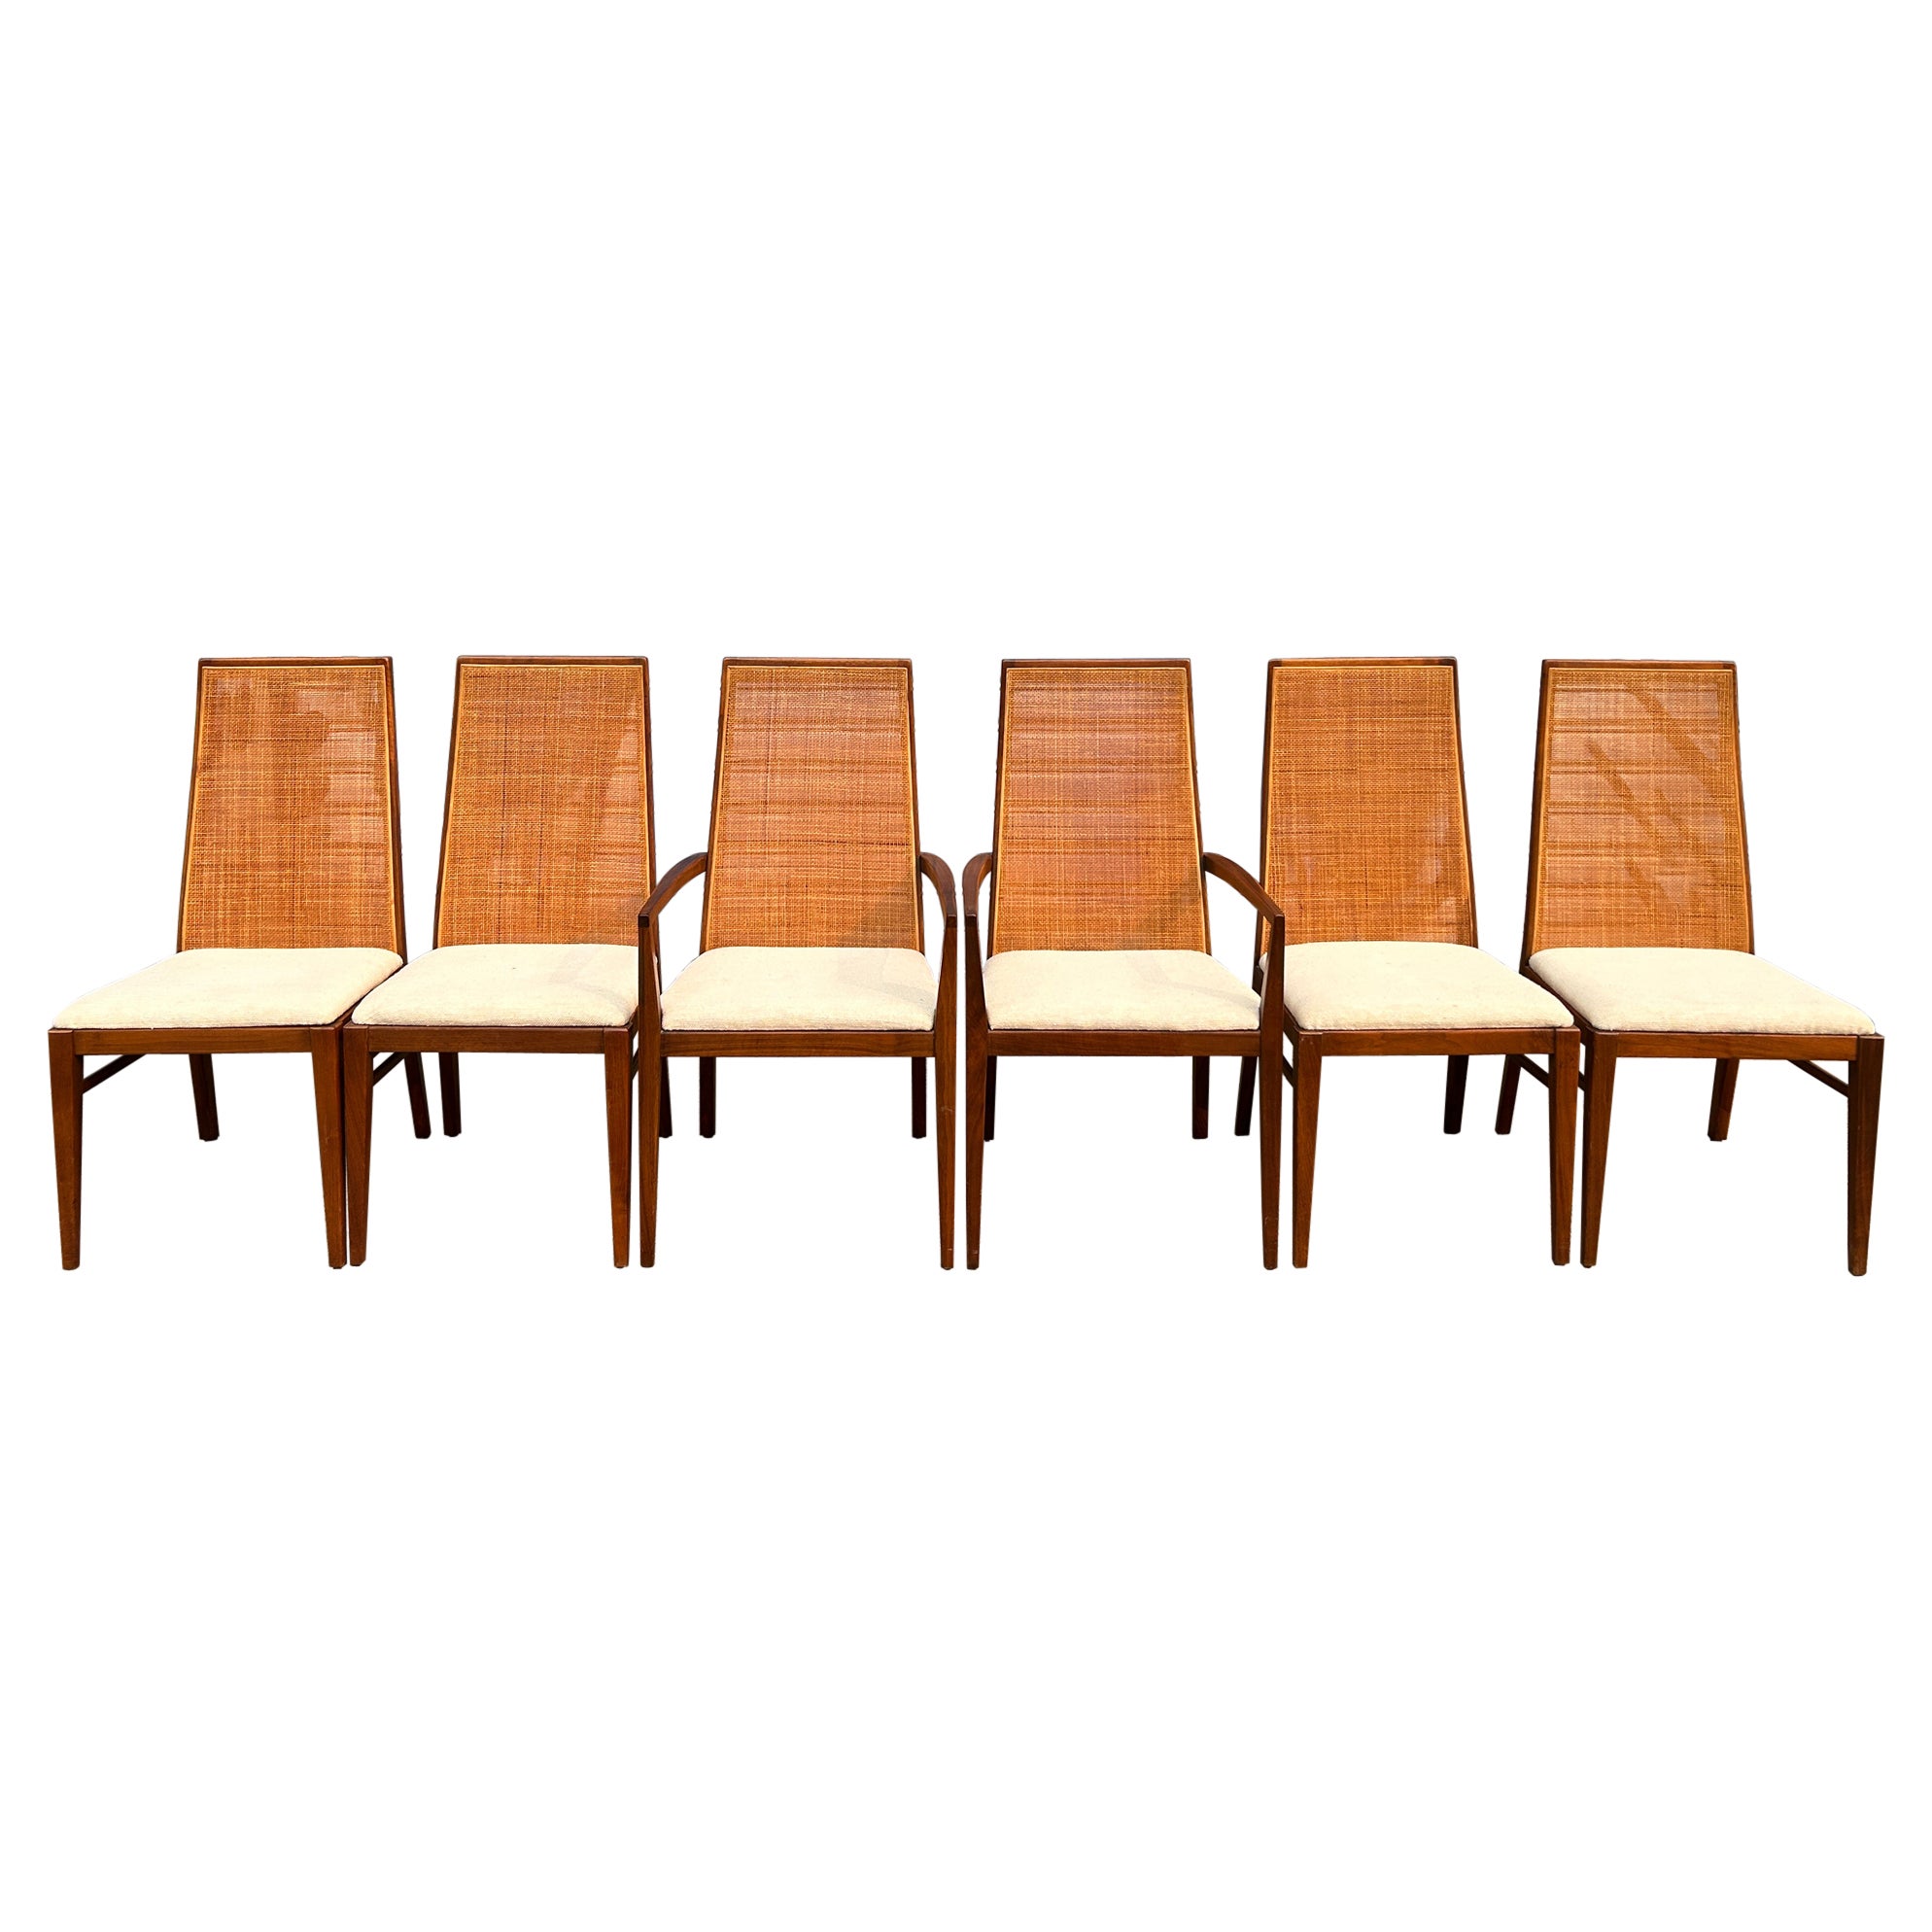 Set of 6 Mid-Century Modern Tapered Cane Back Dining Chairs